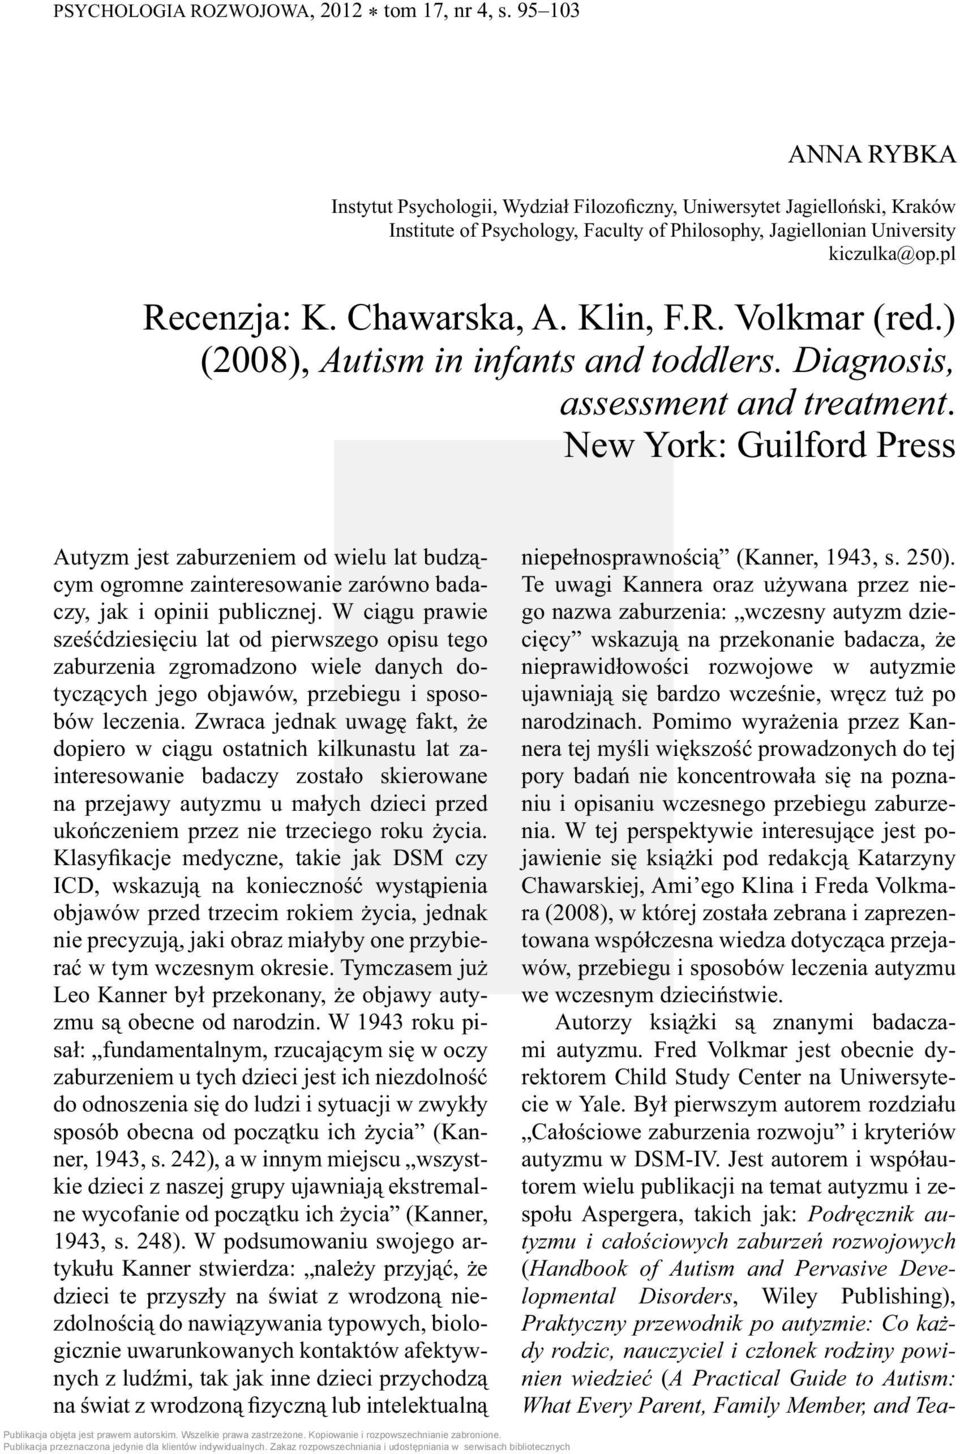 Chawarska, A. Klin, F.R. Volkmar (red.) (2008), Autism in infants and toddlers. Diagnosis, assessment and treatment.